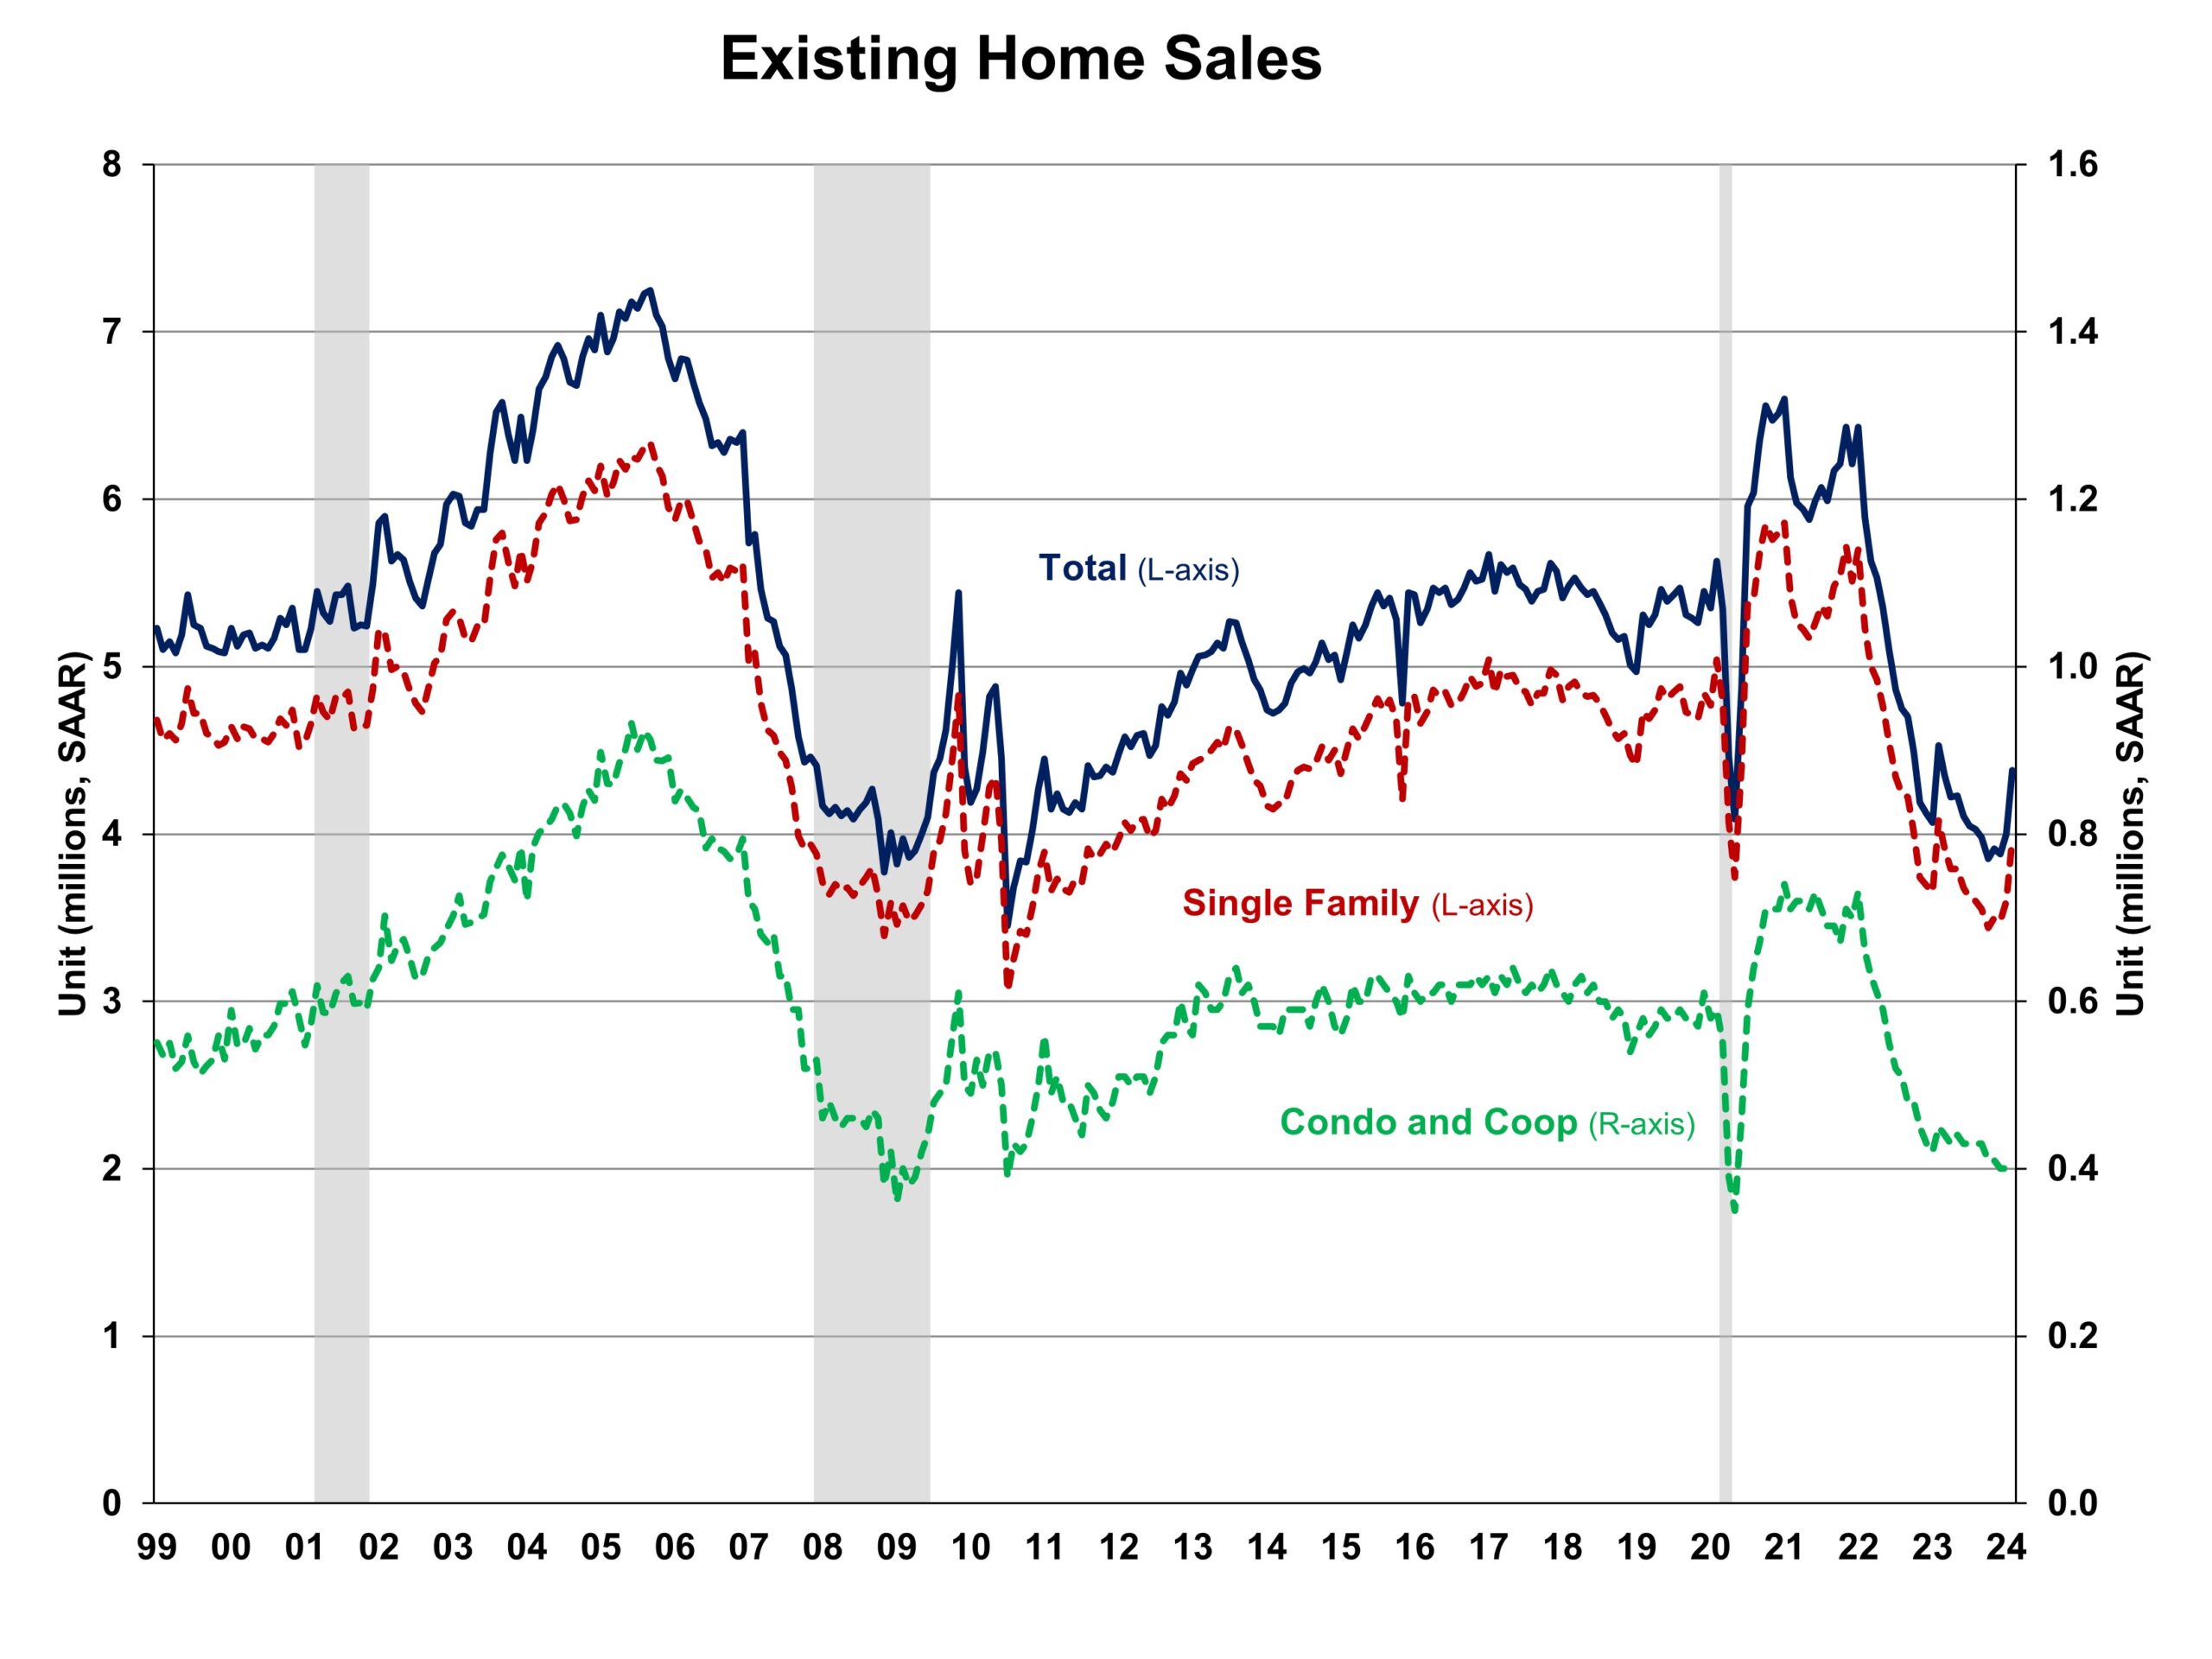 Source: National Association of Home Builders (the NAHB's record of the NAR existing homes data)